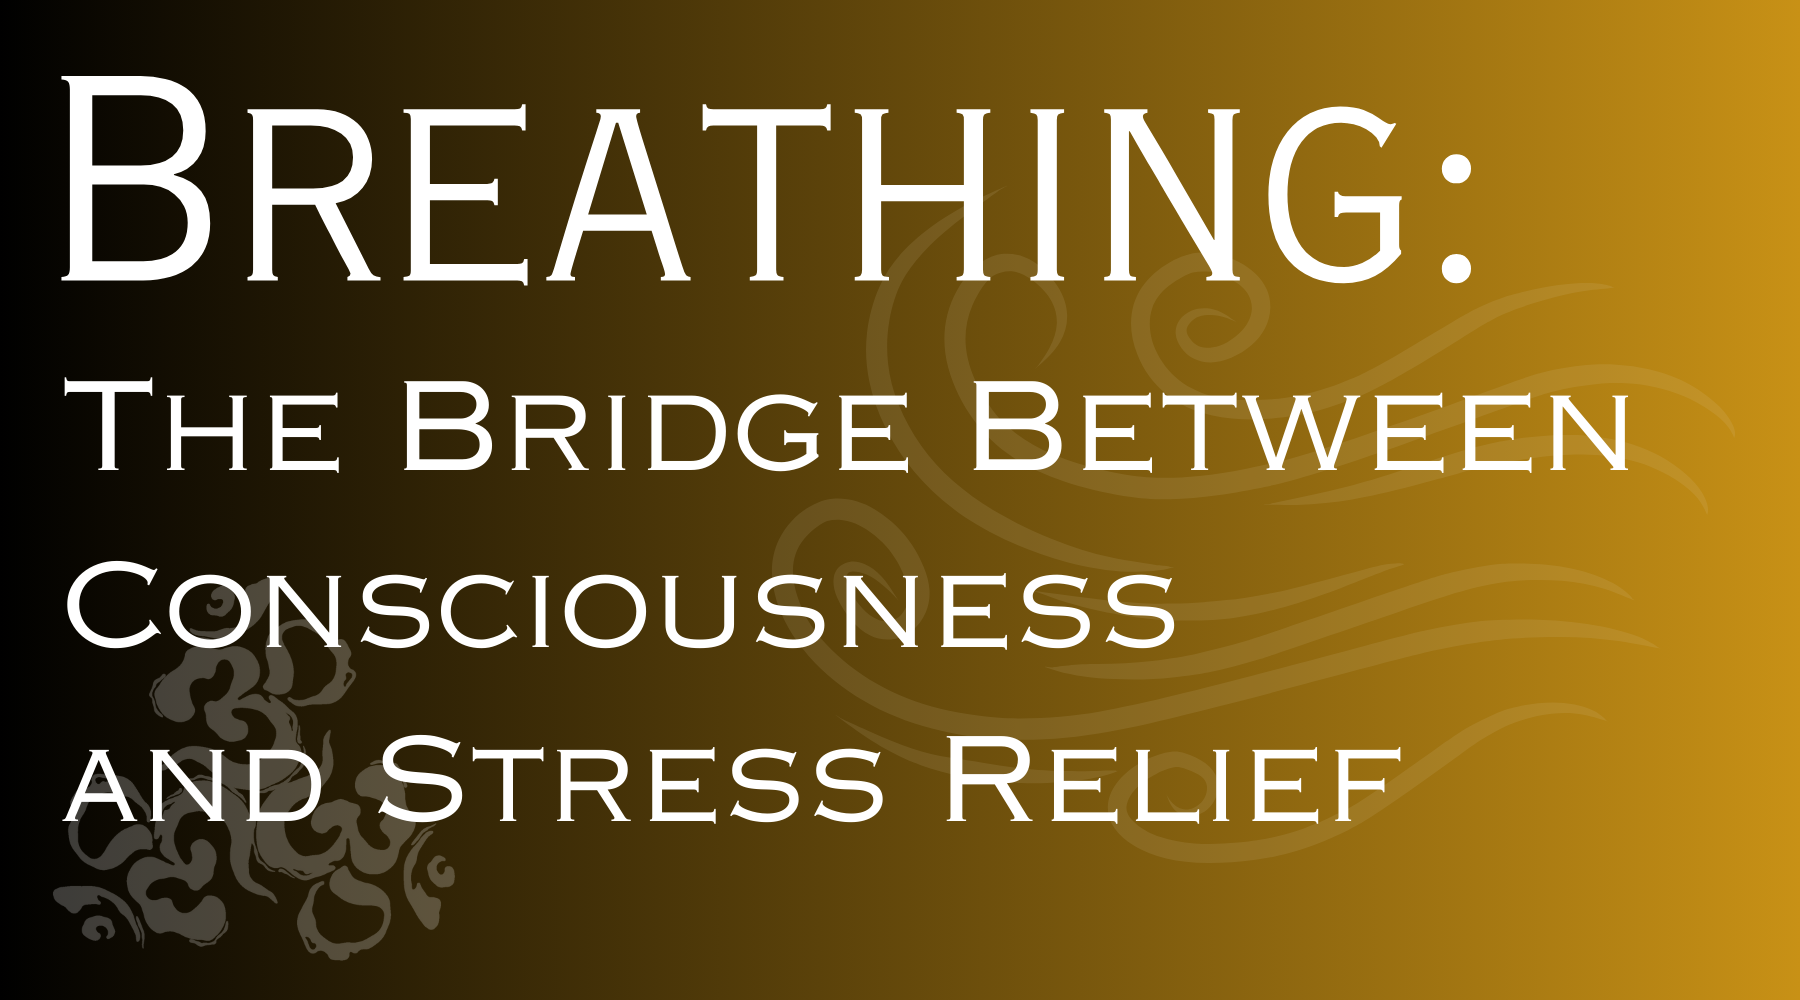 Breathing: The Bridge Between Consciousness and Stress Relief